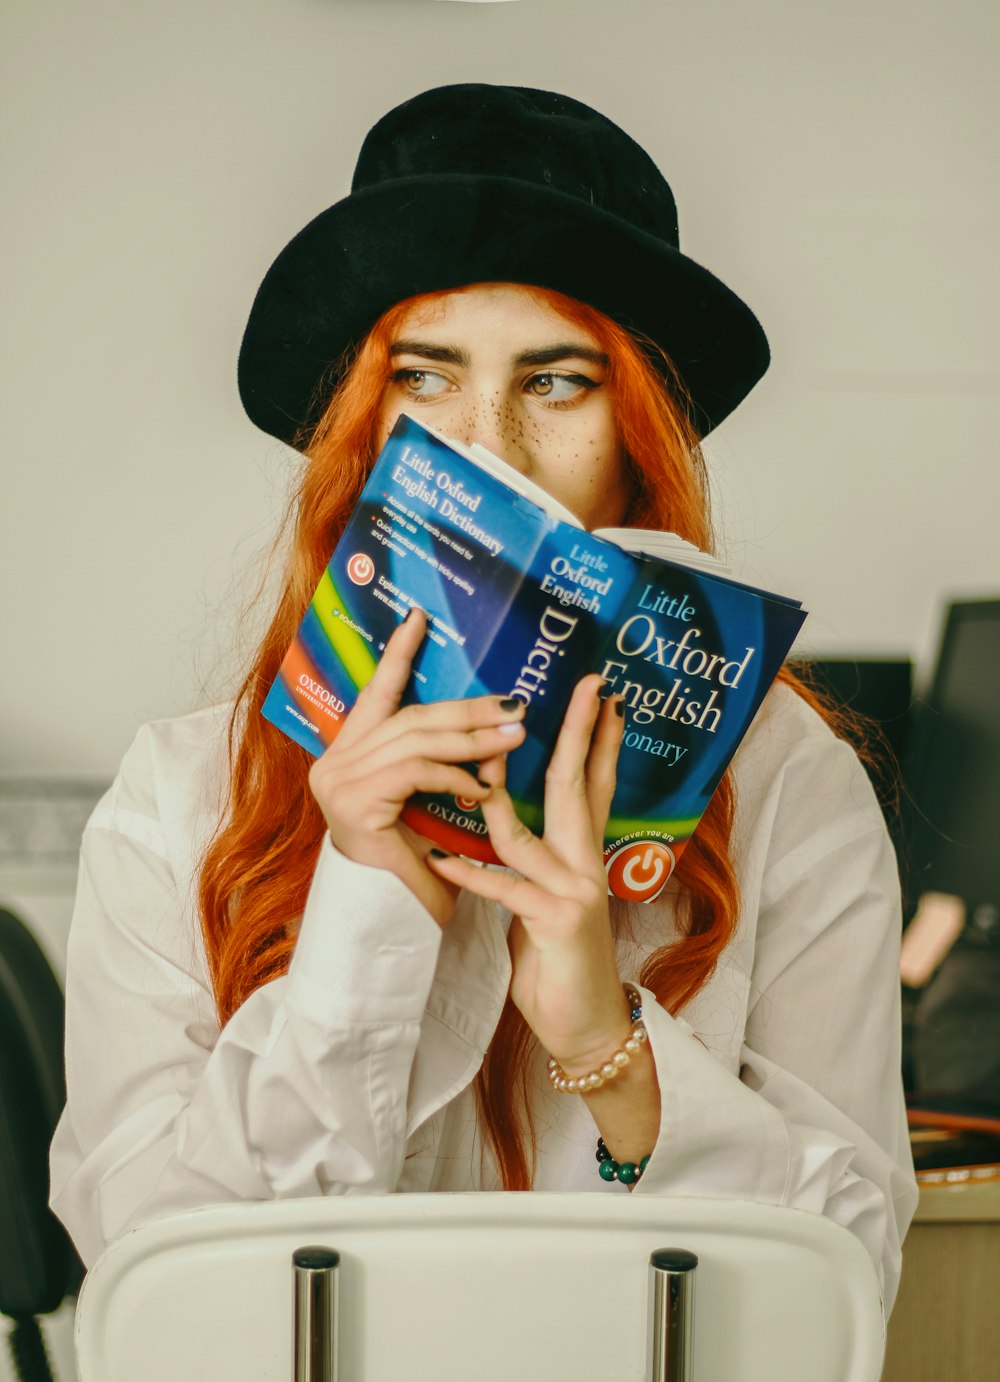 a woman with red hair is holding a book